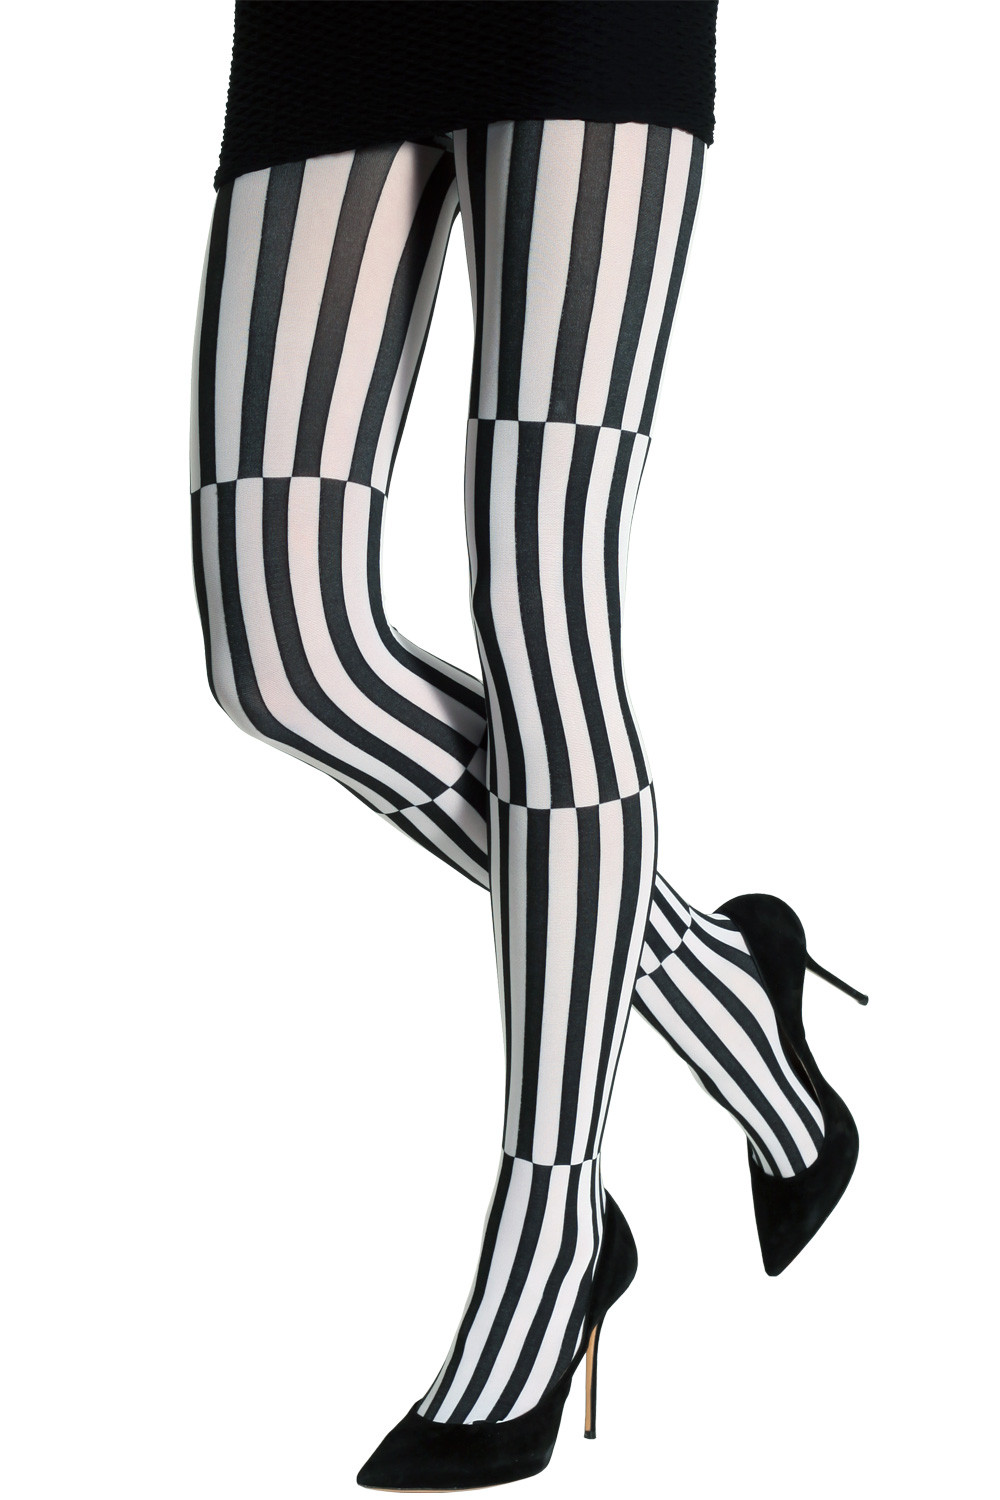 Black and White Striped Leggings · Everyday Sweetheart · Online Store  Powered by Storenvy